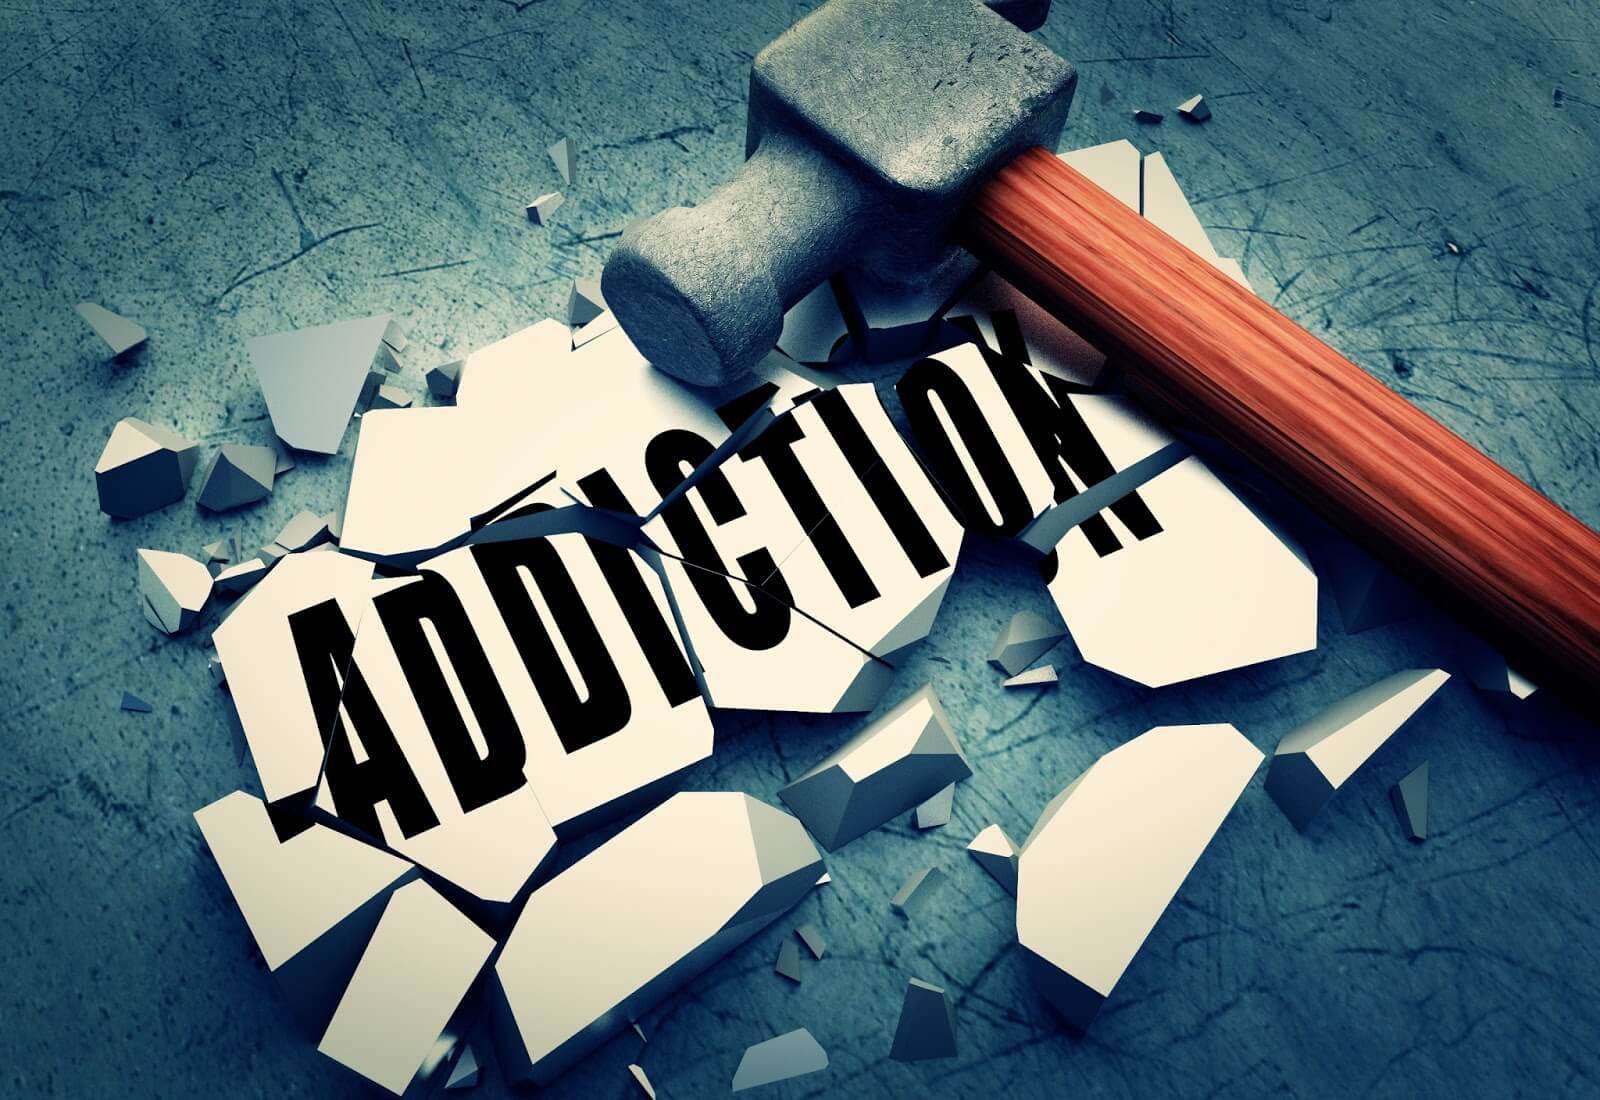 Overcoming Drug Addiction and Remaining Sober